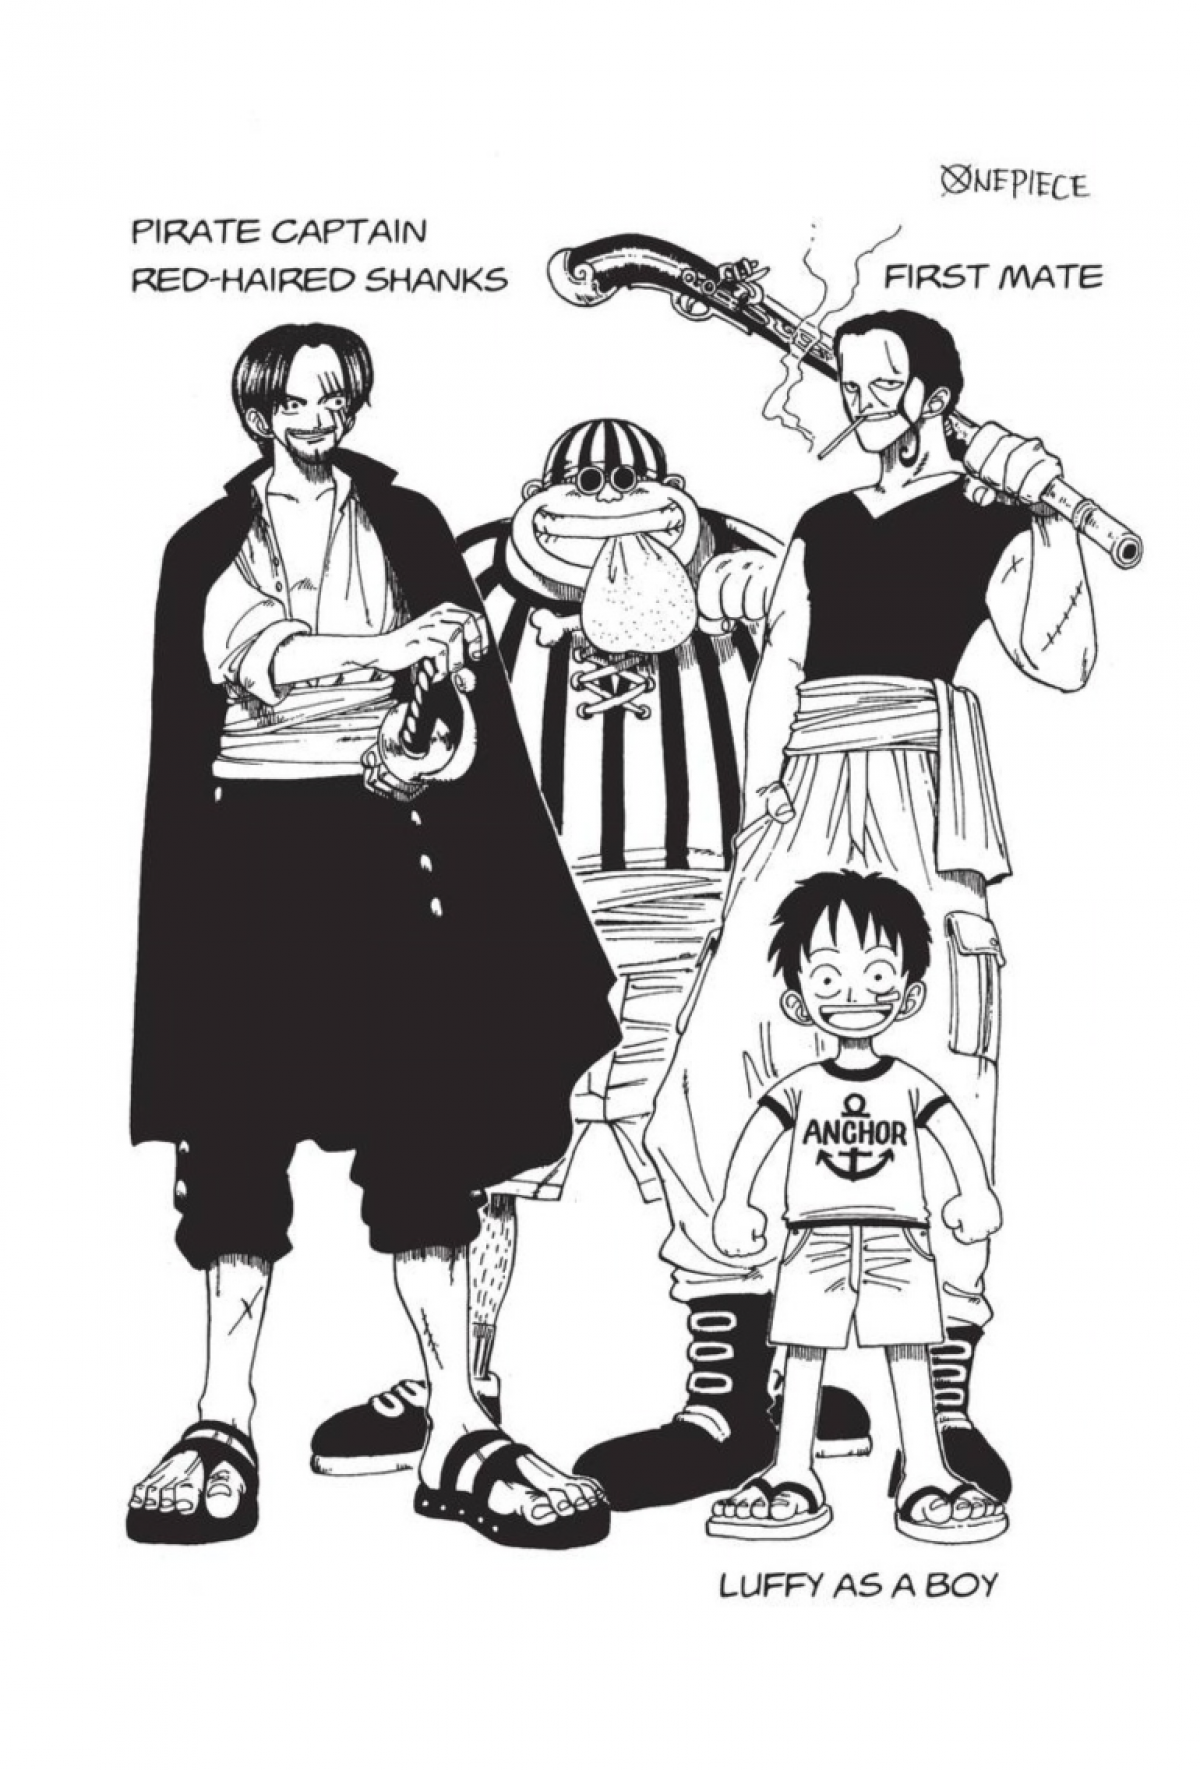 Read 'One Piece' Manga From The Beginning With Chapter 1 and Revisit Monkey  D. Luffy's Origins